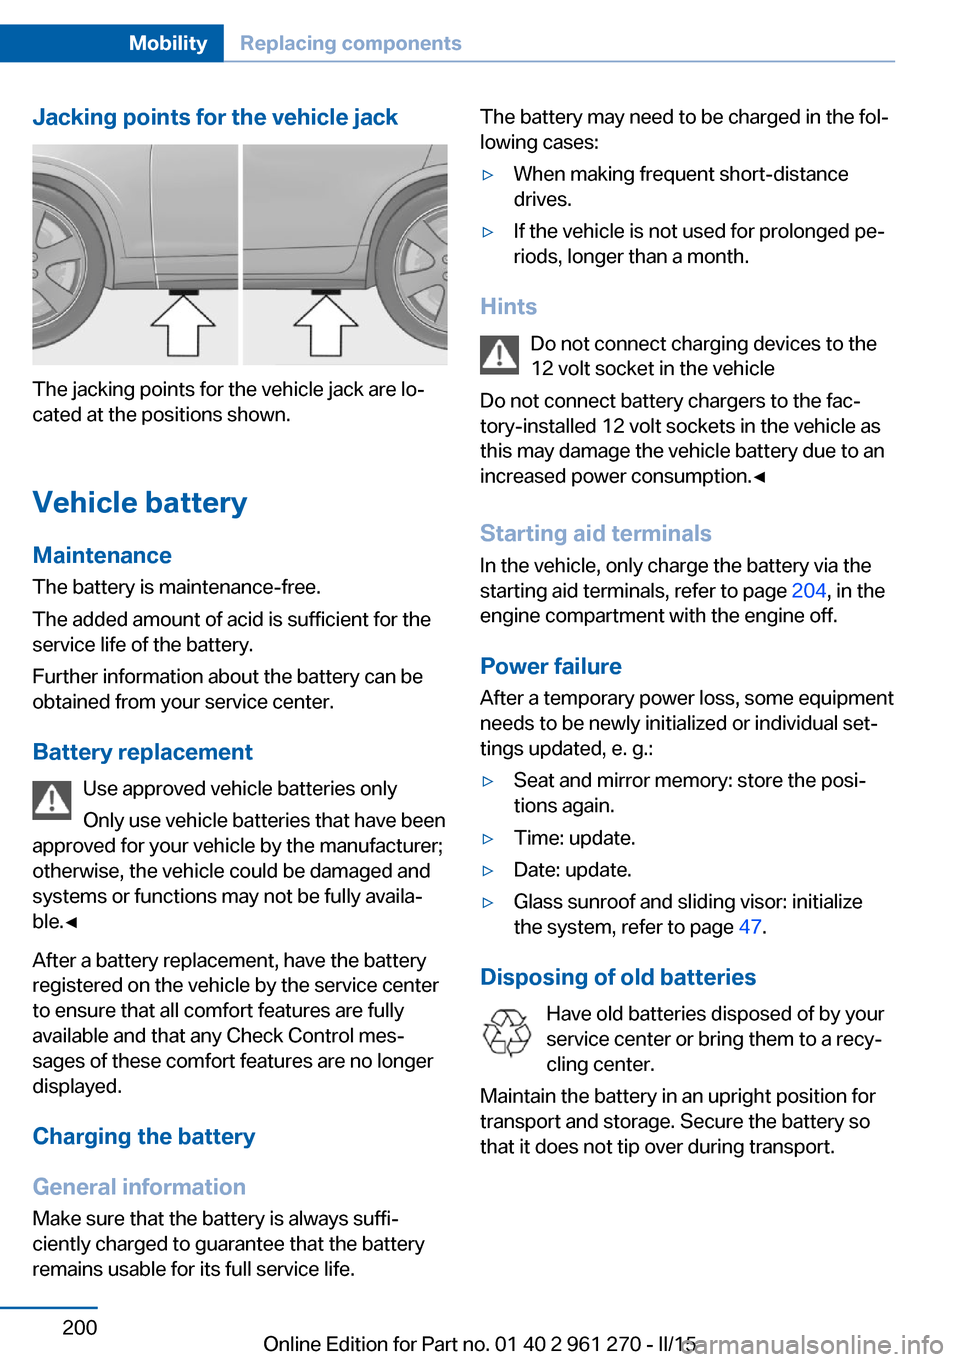 BMW 2 SERIES COUPE 2015 F22 Owners Manual Jacking points for the vehicle jack
The jacking points for the vehicle jack are lo‐
cated at the positions shown.
Vehicle battery Maintenance
The battery is maintenance-free.
The added amount of aci